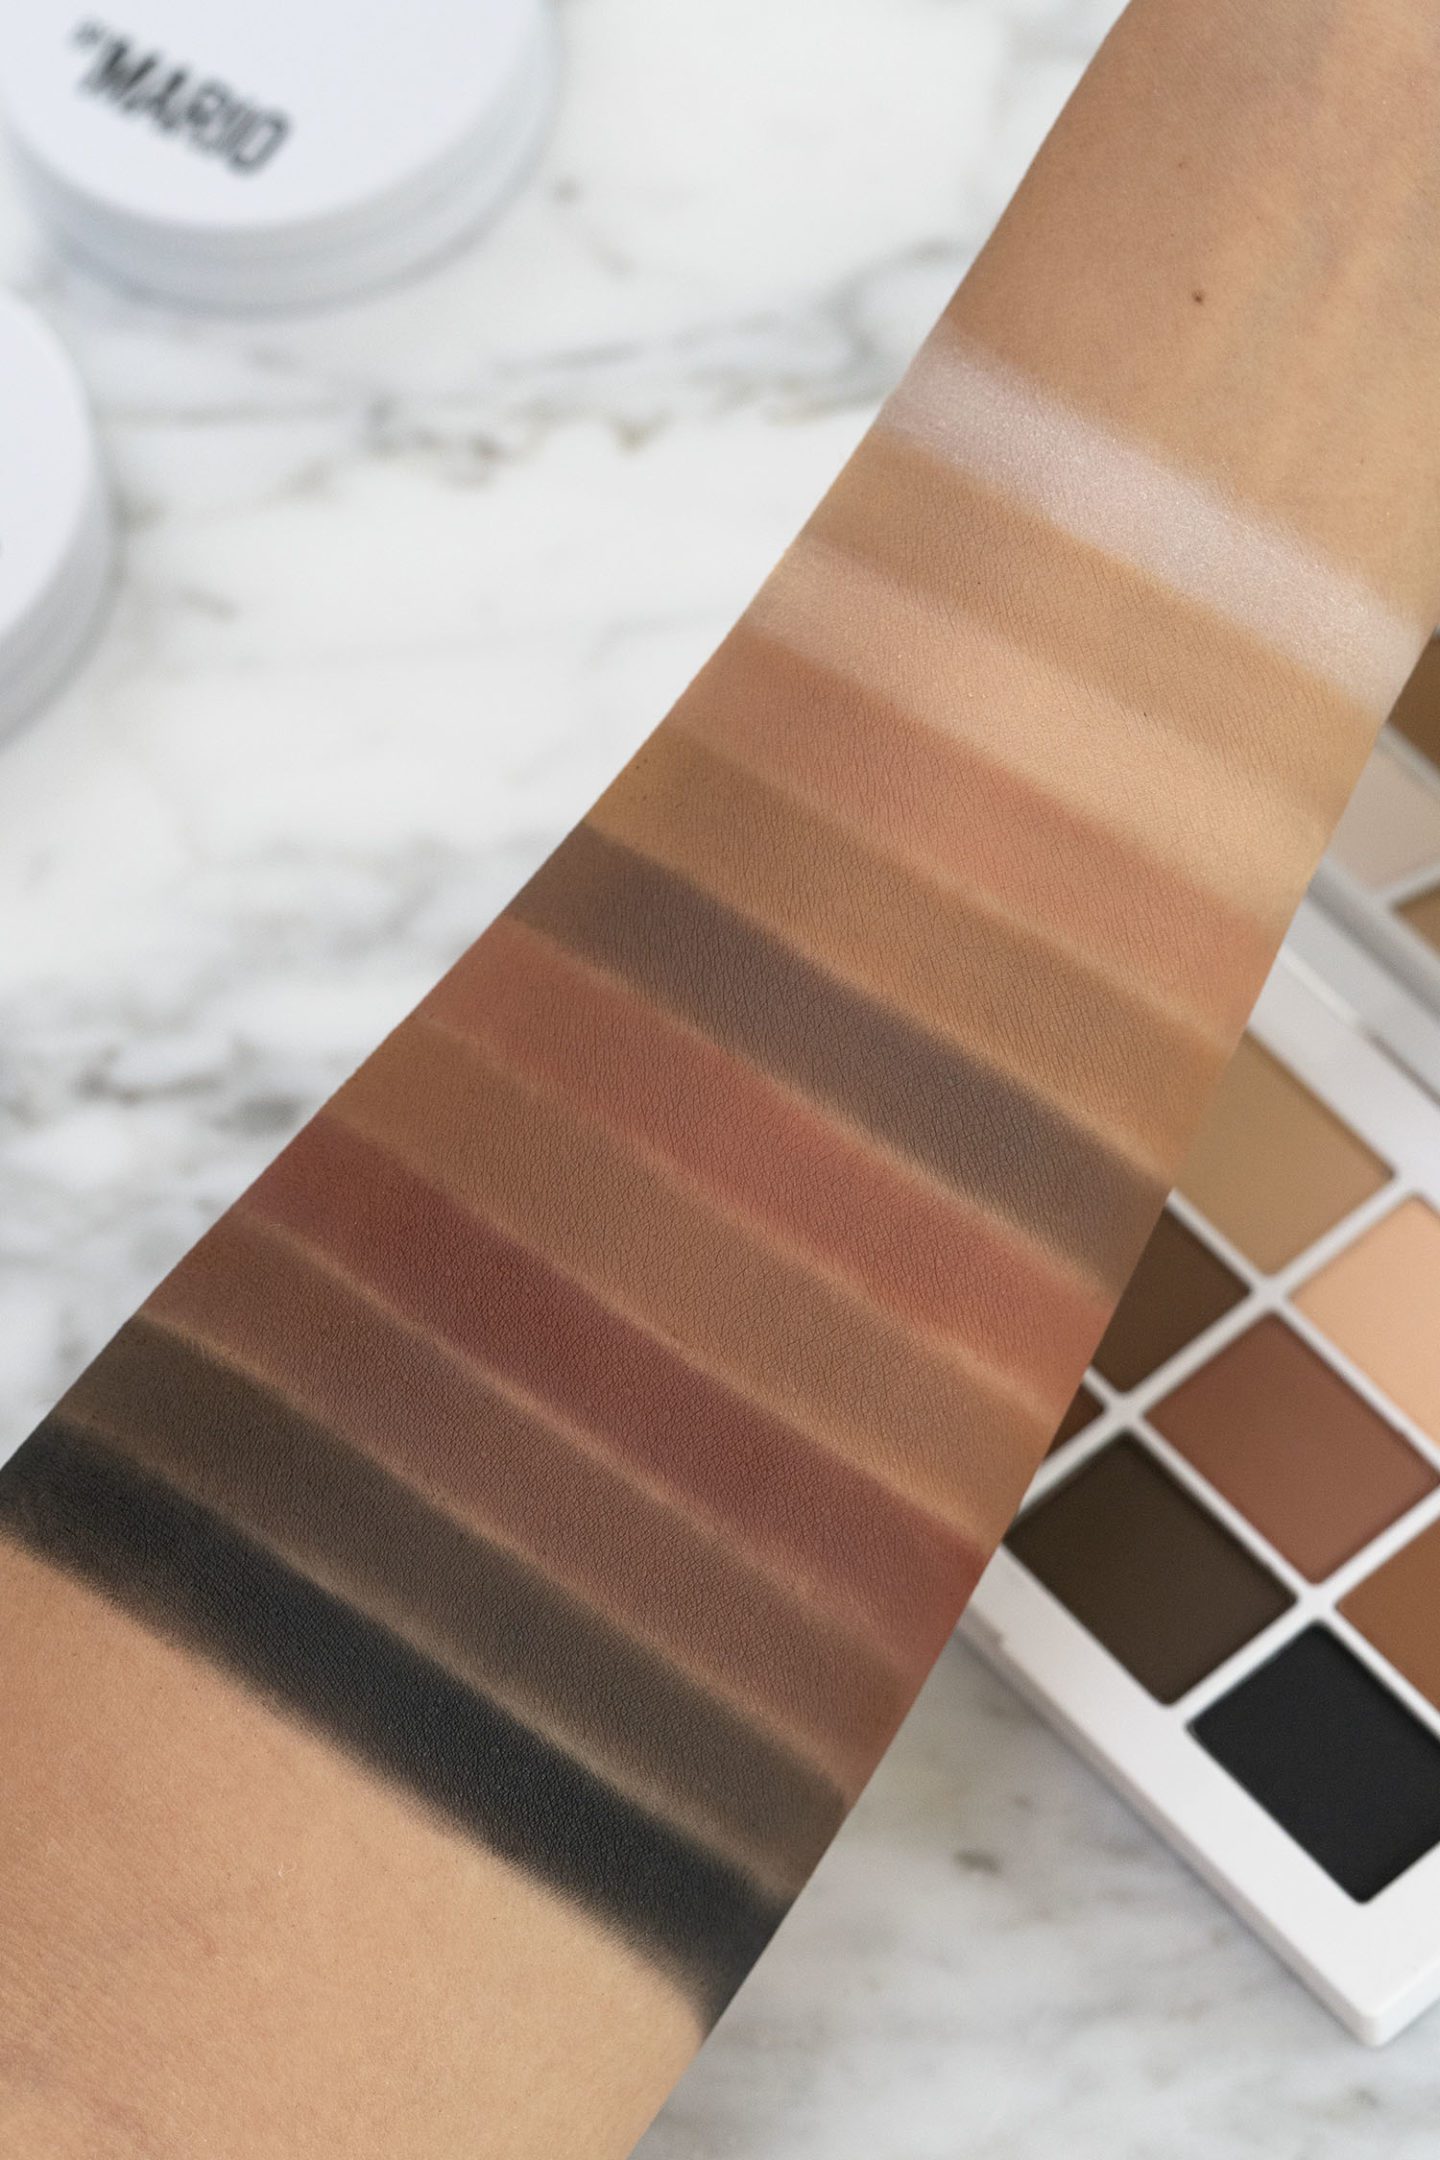 Makeup by Mario Master Mattes Eyeshadow Palette swatches